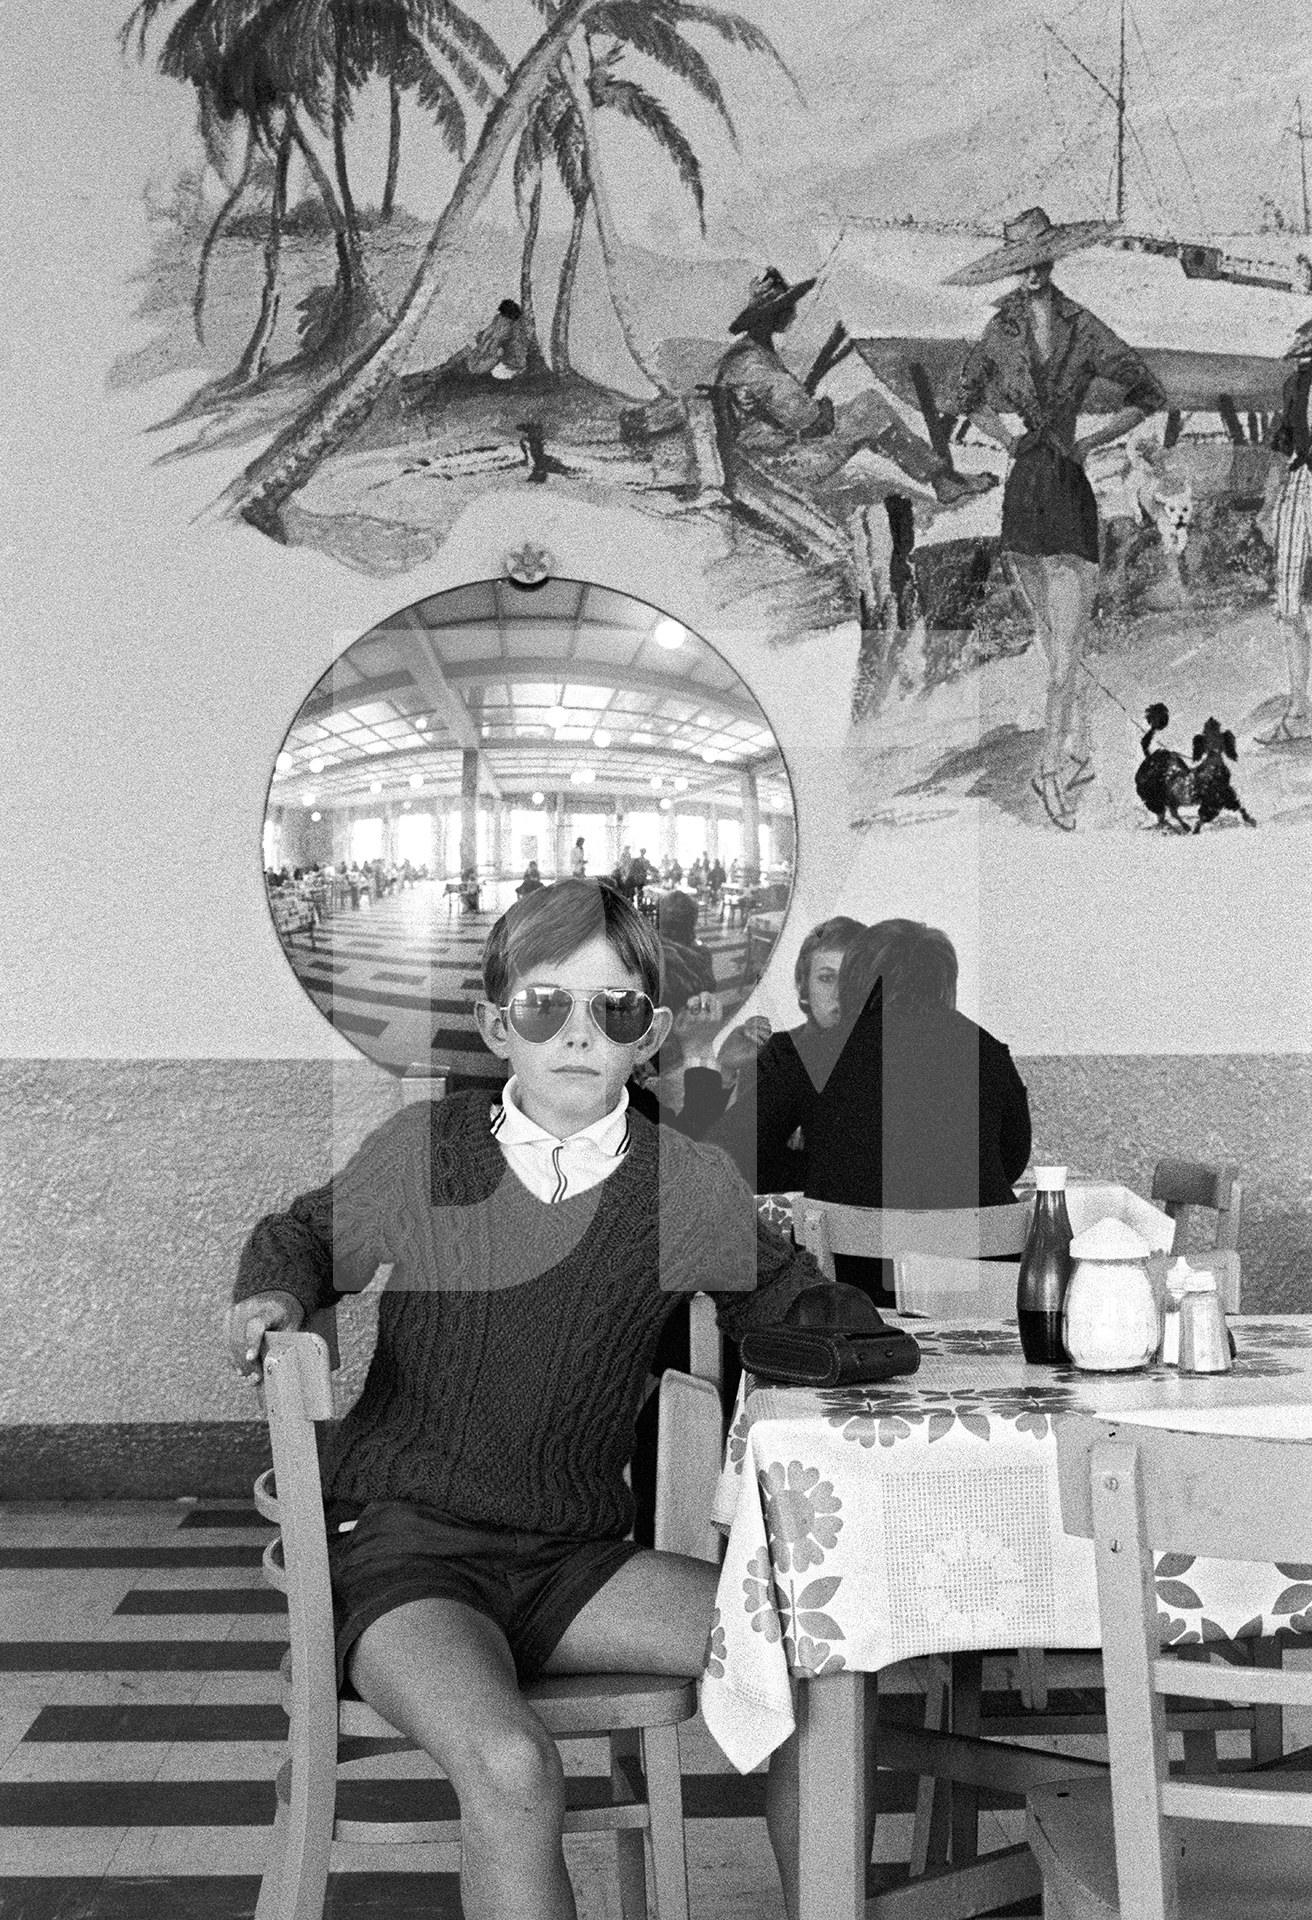 ‘Butlin’s Boy’, from exhibition with Martin Parr: ‘Butlin's by the Sea’, Impressions Gallery, York, November 1972 by Daniel Meadows